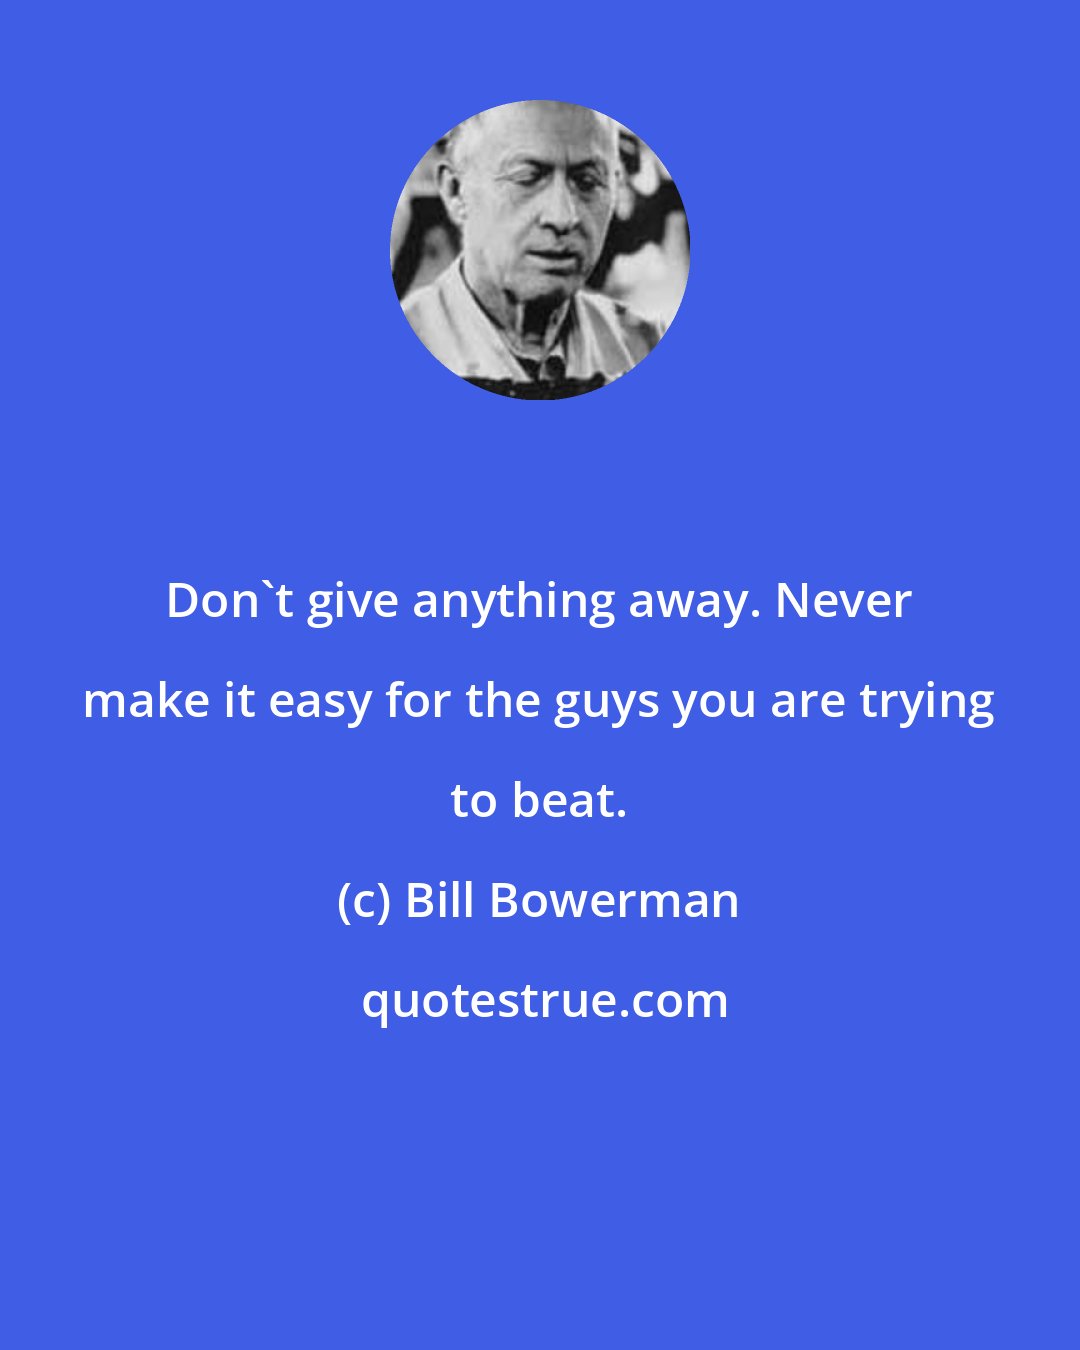 Bill Bowerman: Don't give anything away. Never make it easy for the guys you are trying to beat.